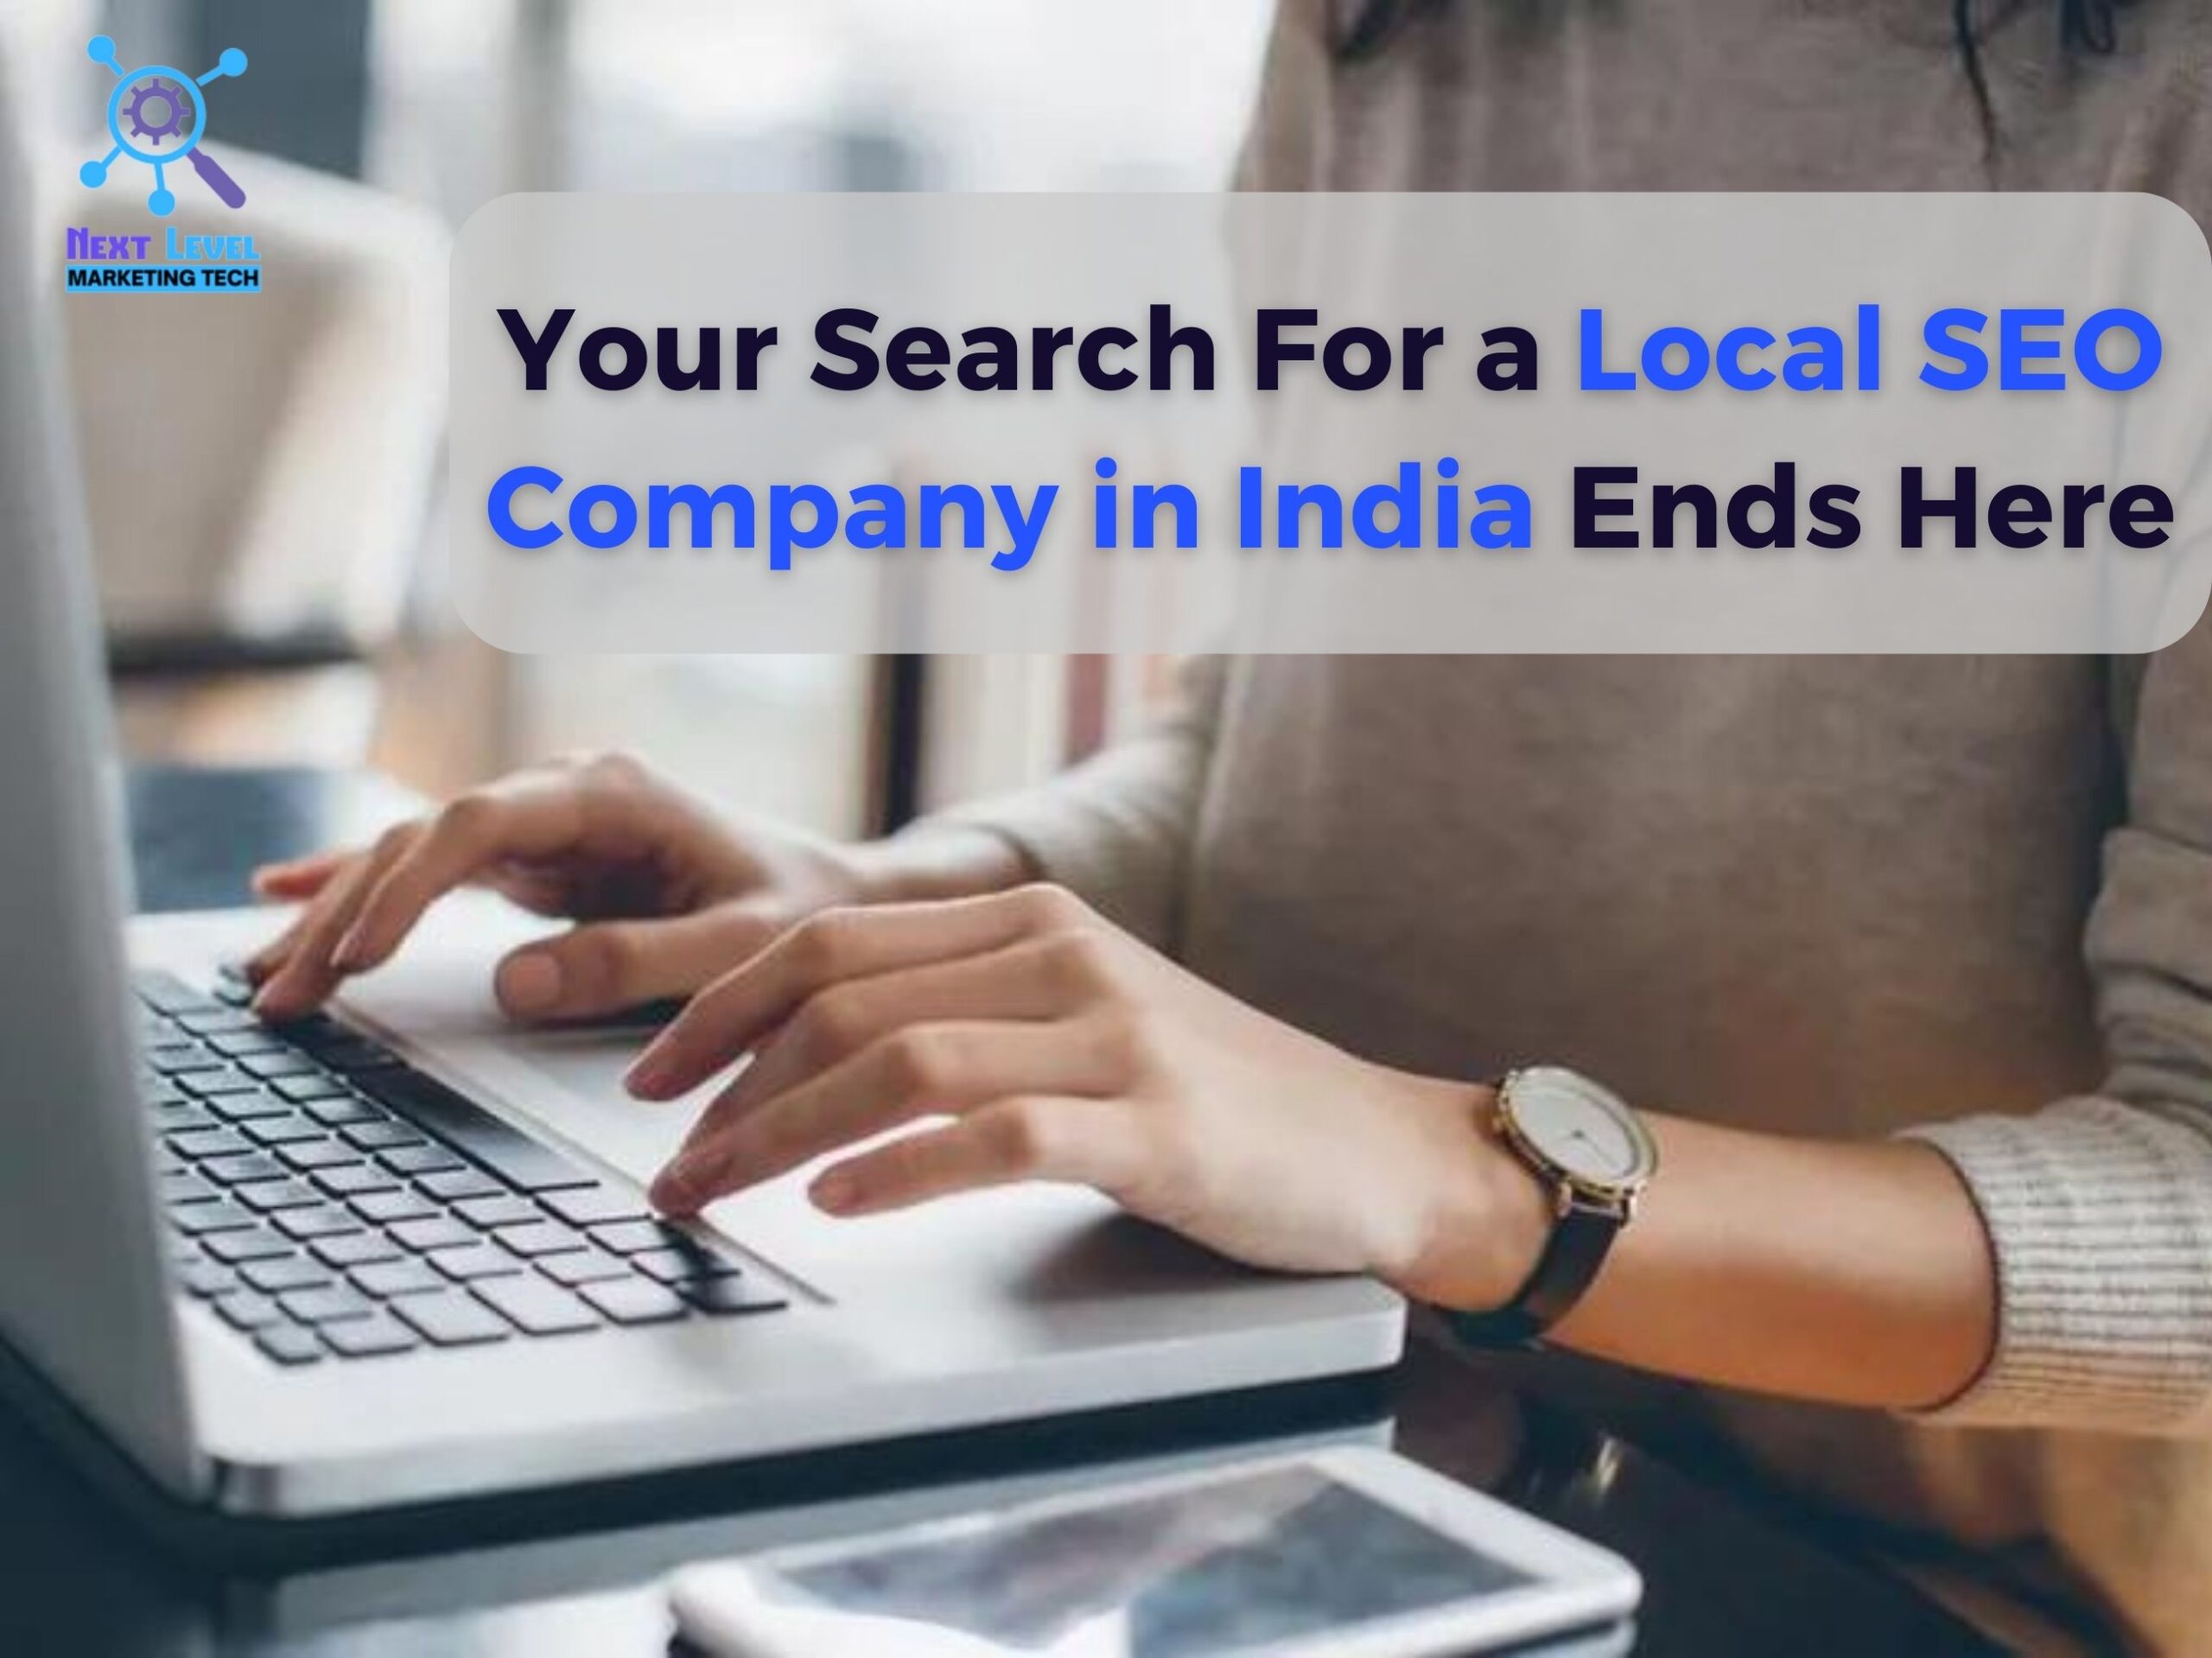 Search For a Local SEO Company in India Ends Here